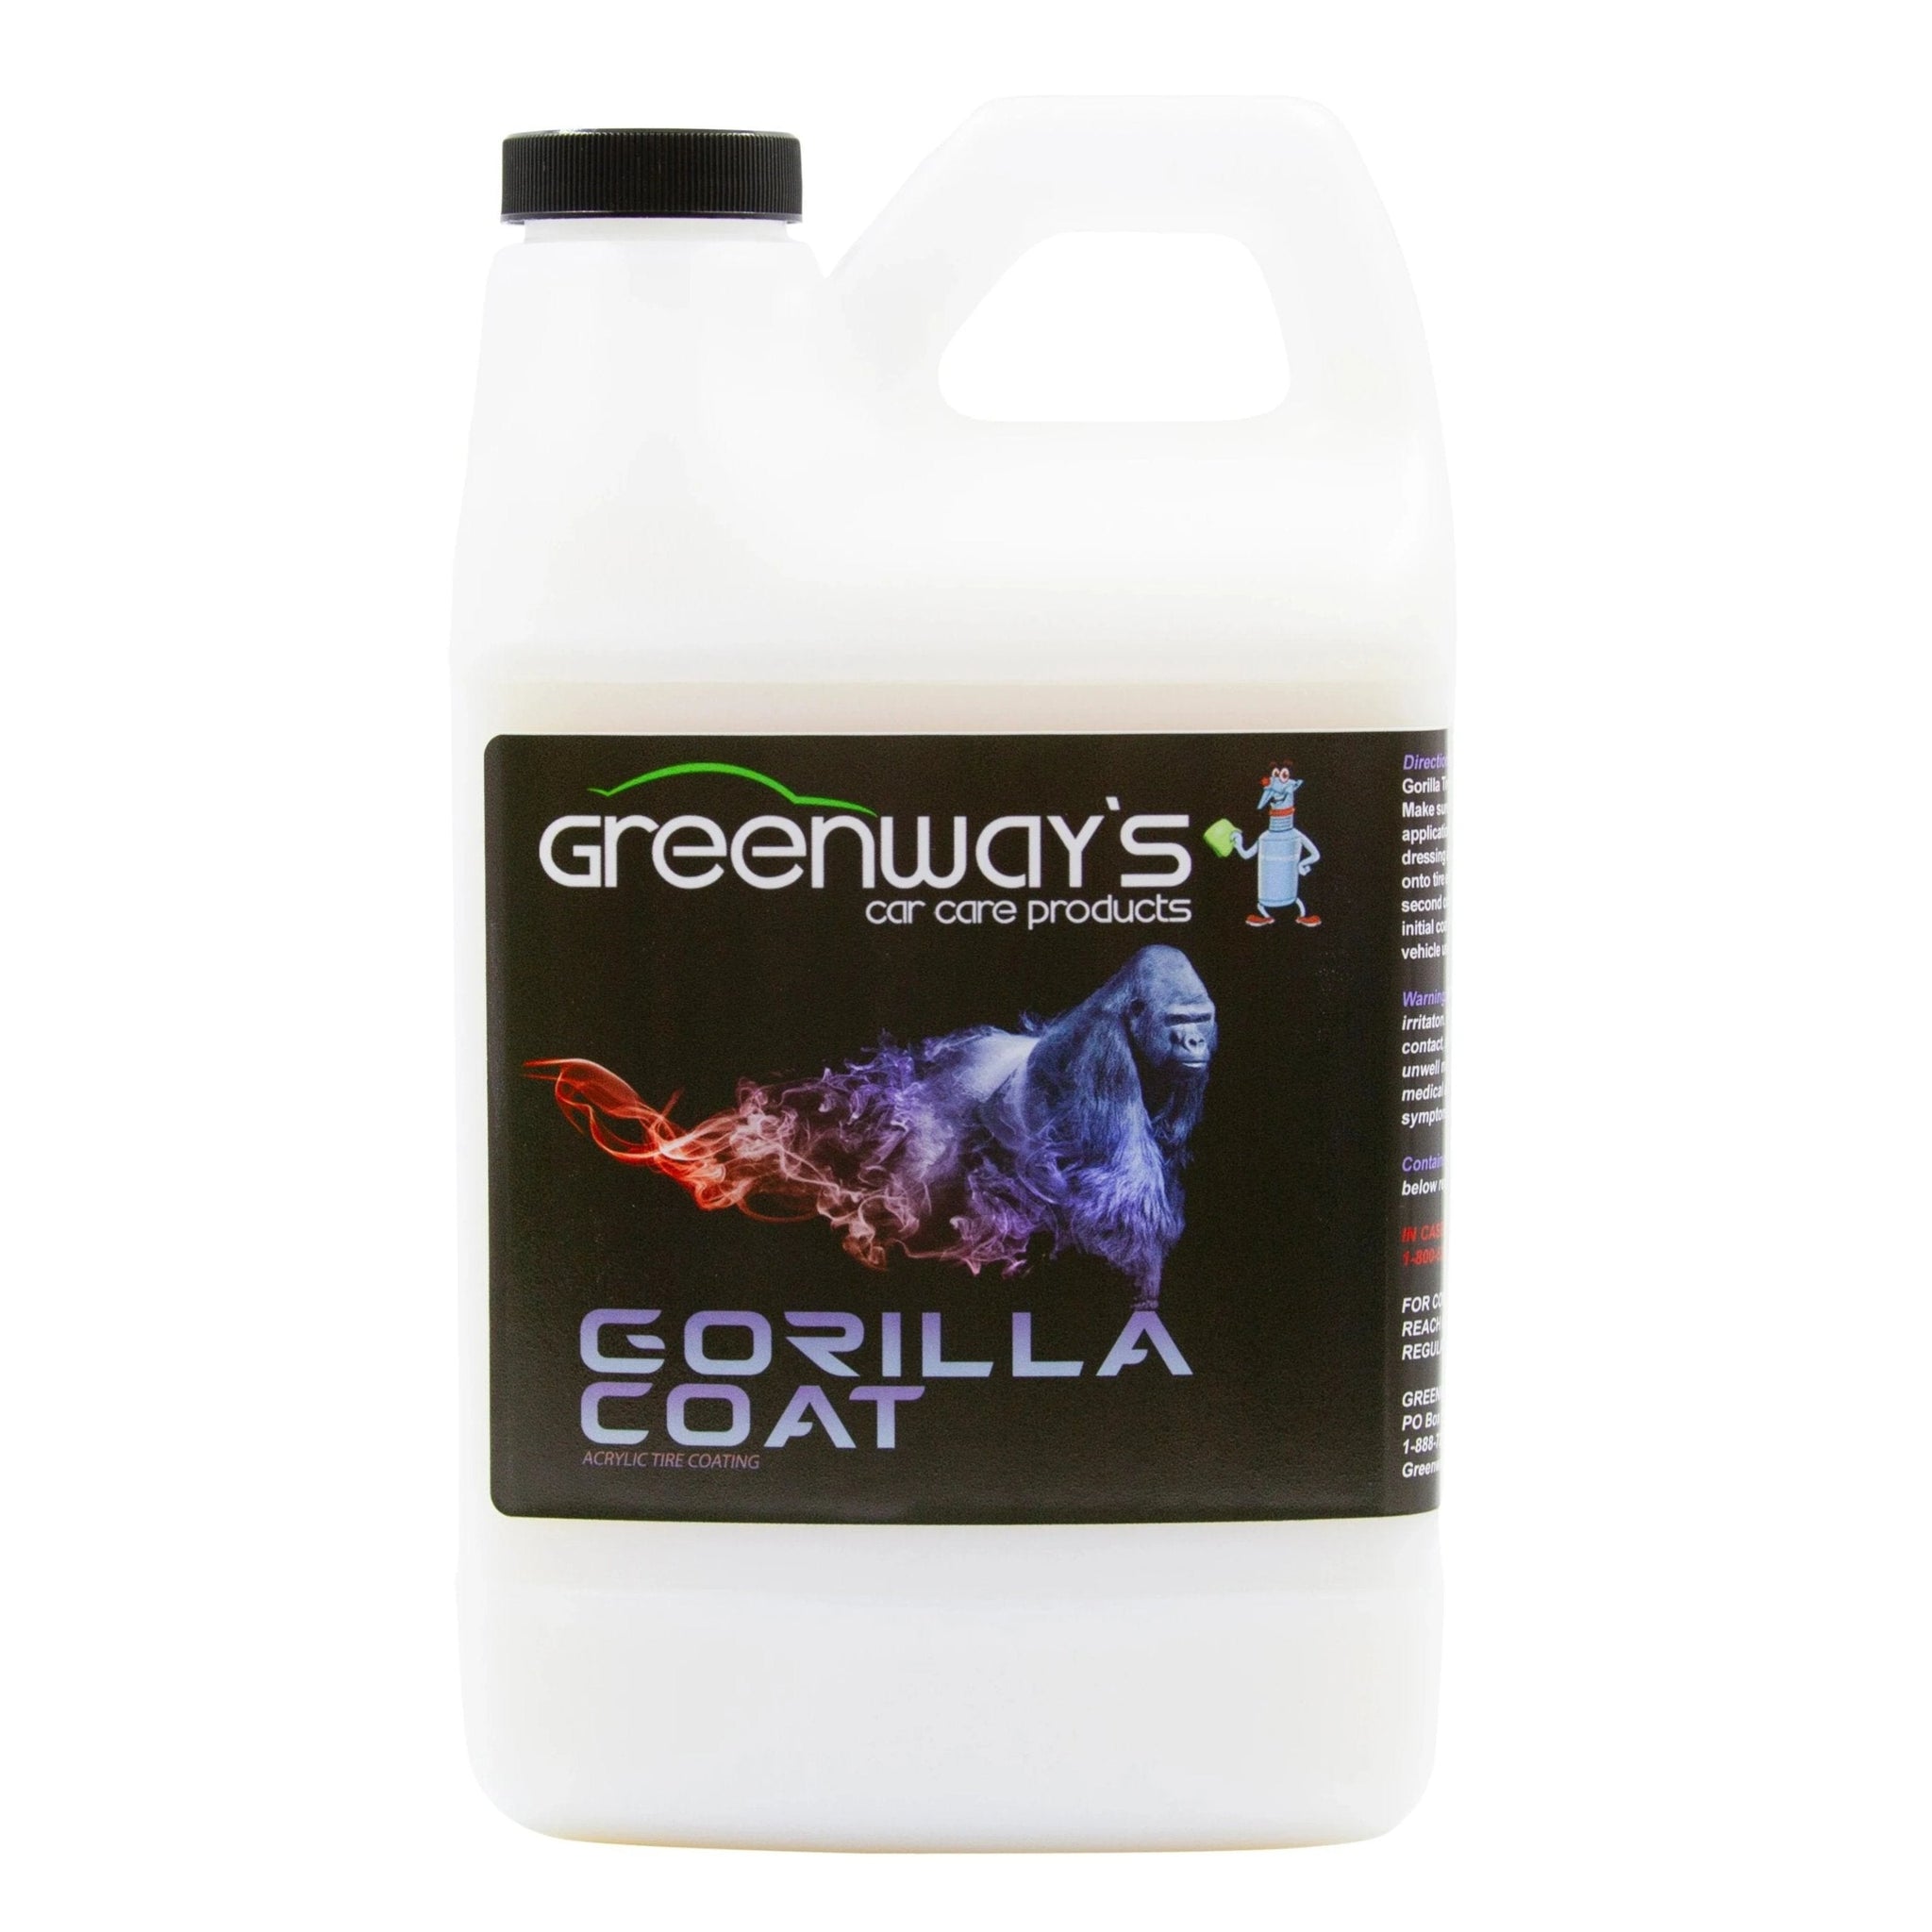 Greenway’s Car Care Products Gorilla Coat, semi-permanent, hydrophobic, satin or high gloss acrylic tire shine coating, 64 ounces.